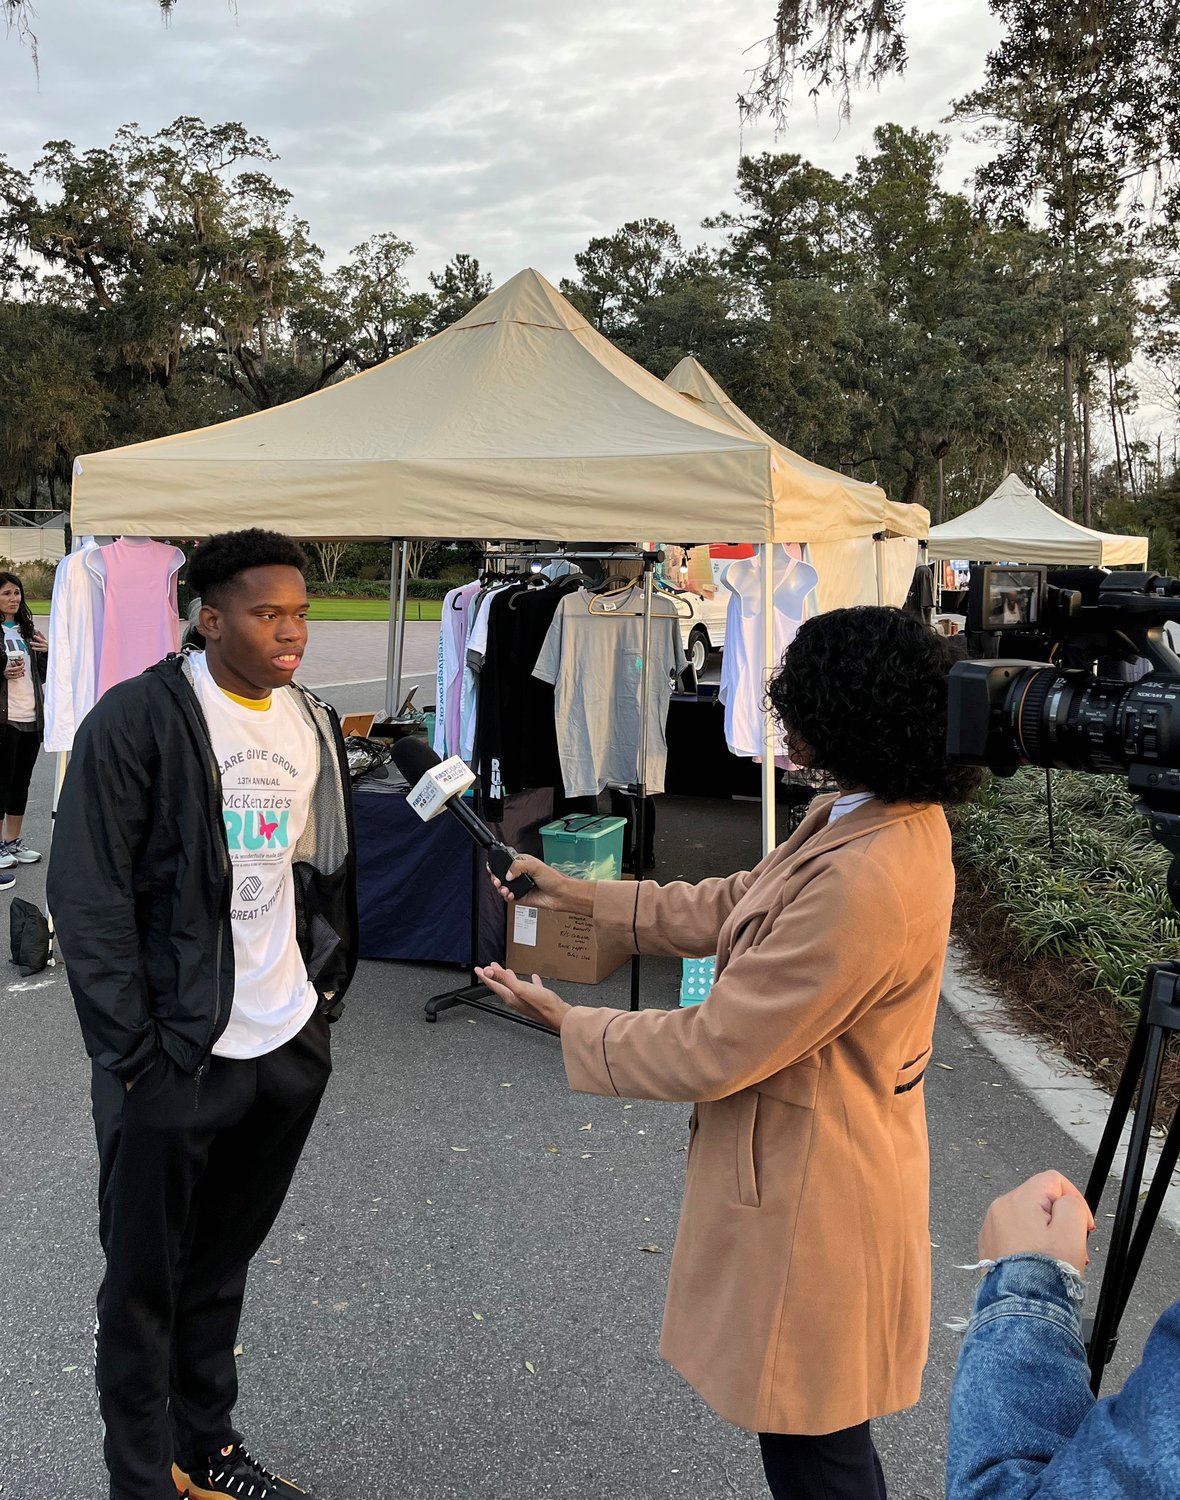 Darius B., a graduating senior and 12-year Boys & Girls Club member, speaks with media about his club experience during the 13th Annual McKenzie’s Run.